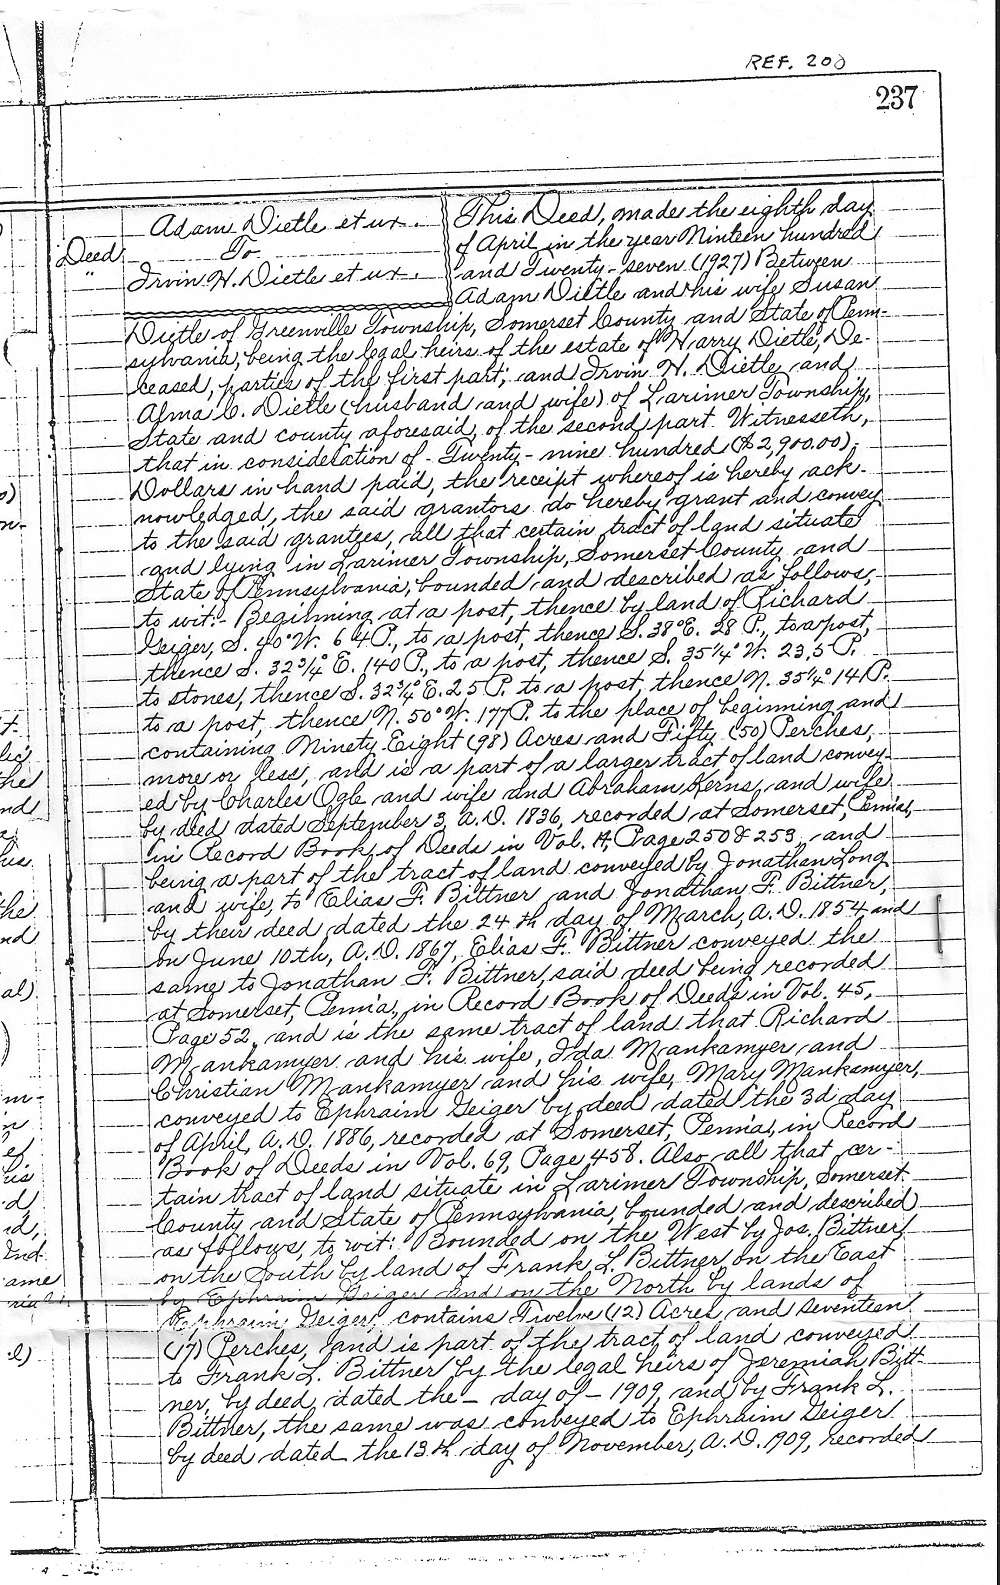 Page 237, 1927 deed to Irvin Dietle for his Larimer Township, Somerset County, PA farm.